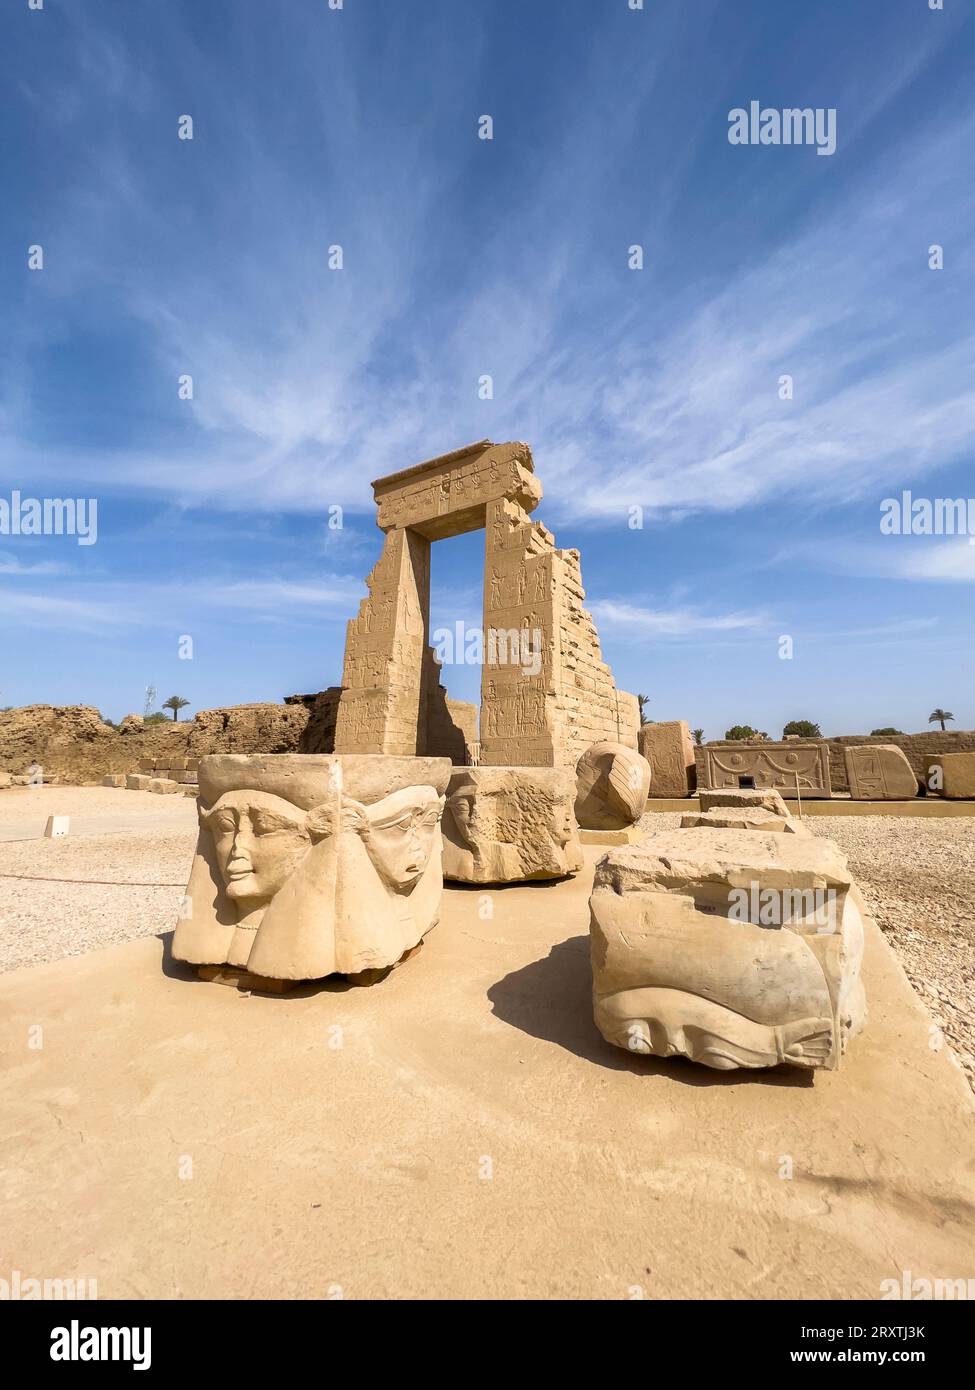 Gate of Domitian and Trajan, northern entrance of the Temple of Hathor, Dendera Temple complex, Dendera, Egypt, North Africa, Africa Stock Photo